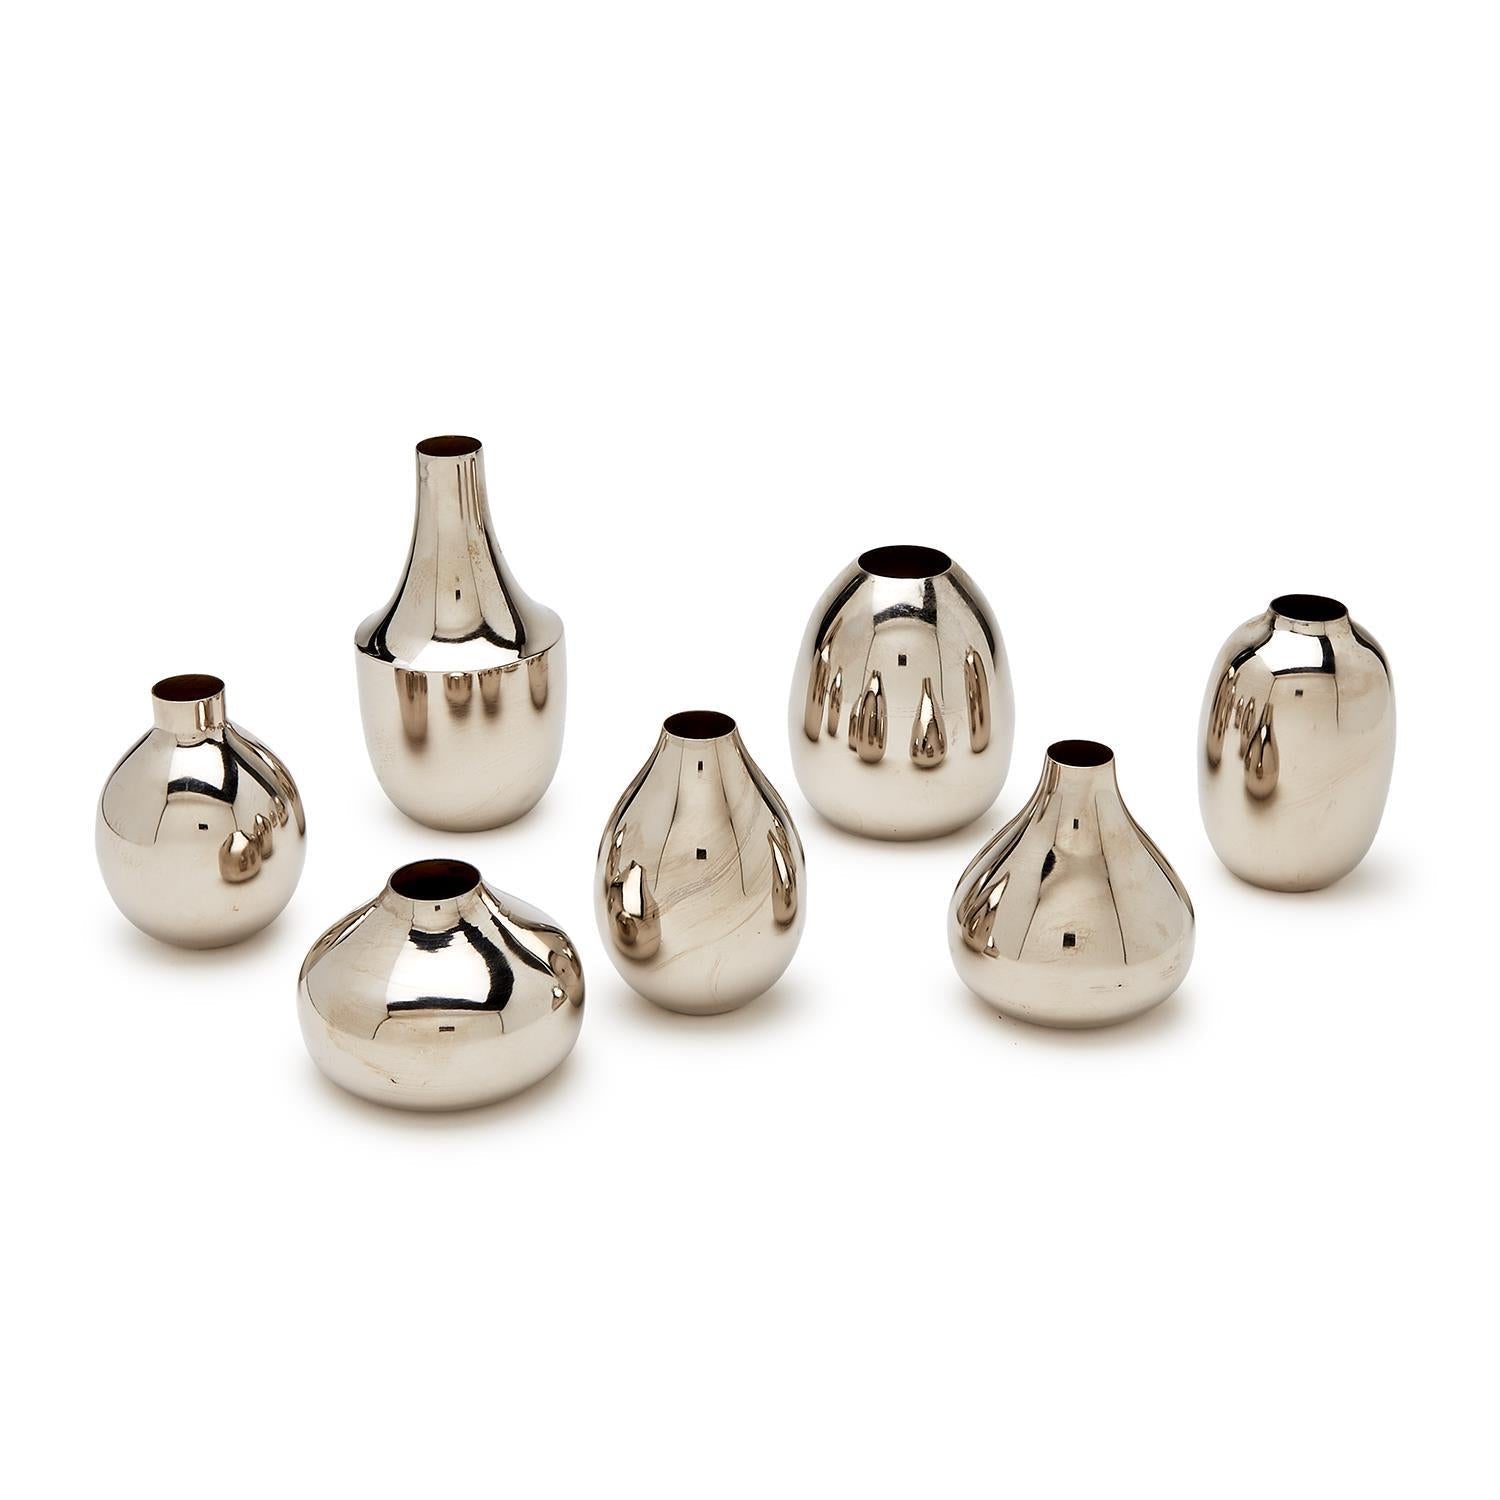 S7 Silver-Plated Nickel Vases